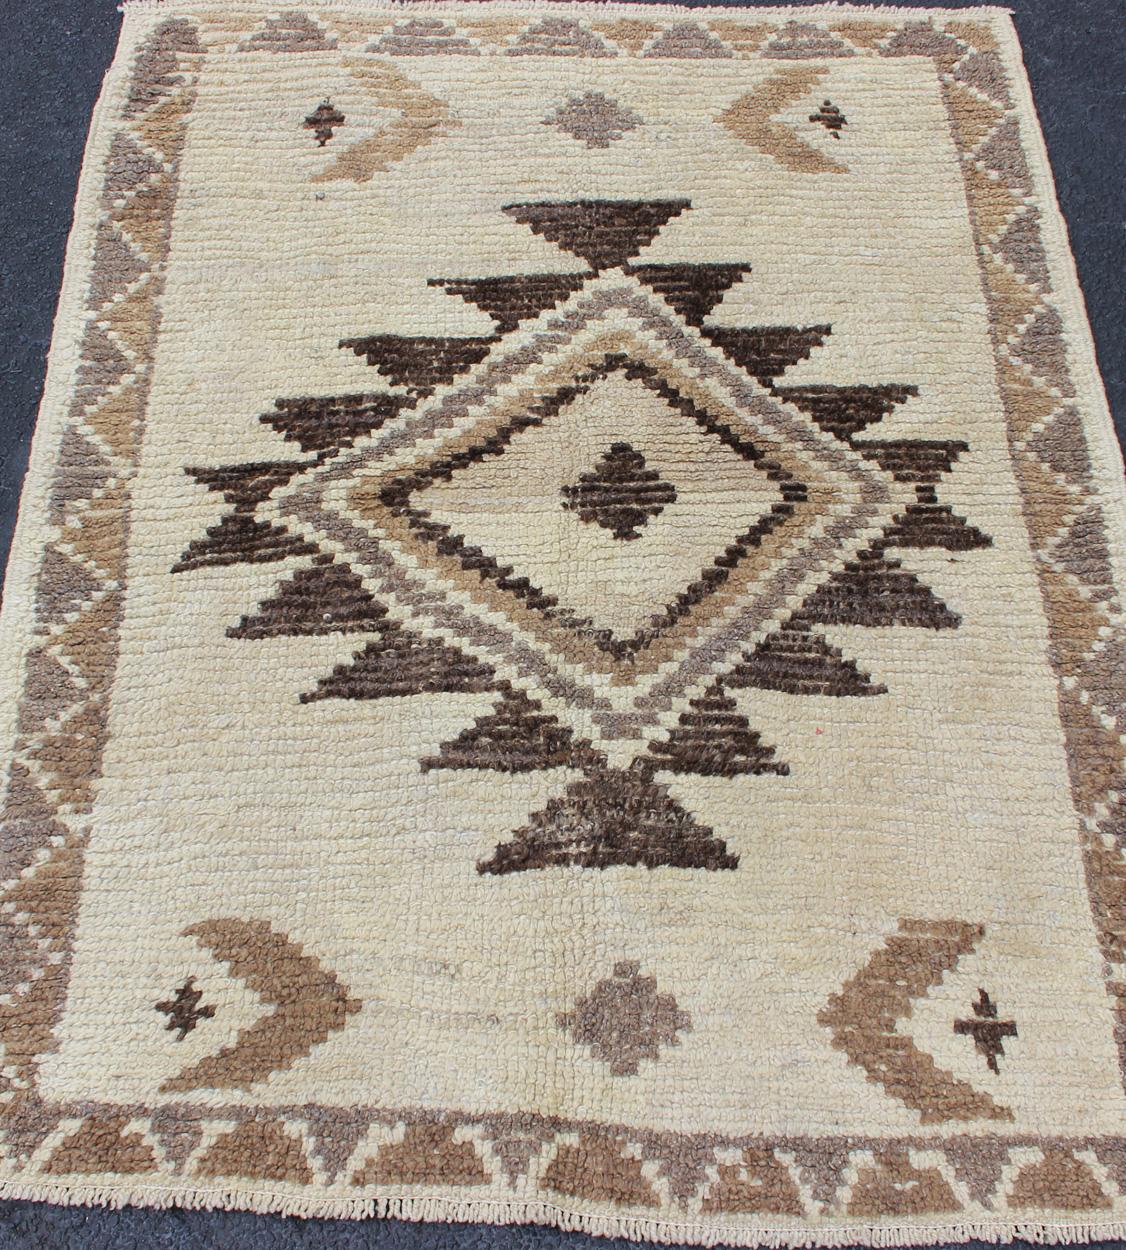 20th Century Natural Colors Turkish Tulu Carpet with Tribal Design in Shades of Earth Tones For Sale